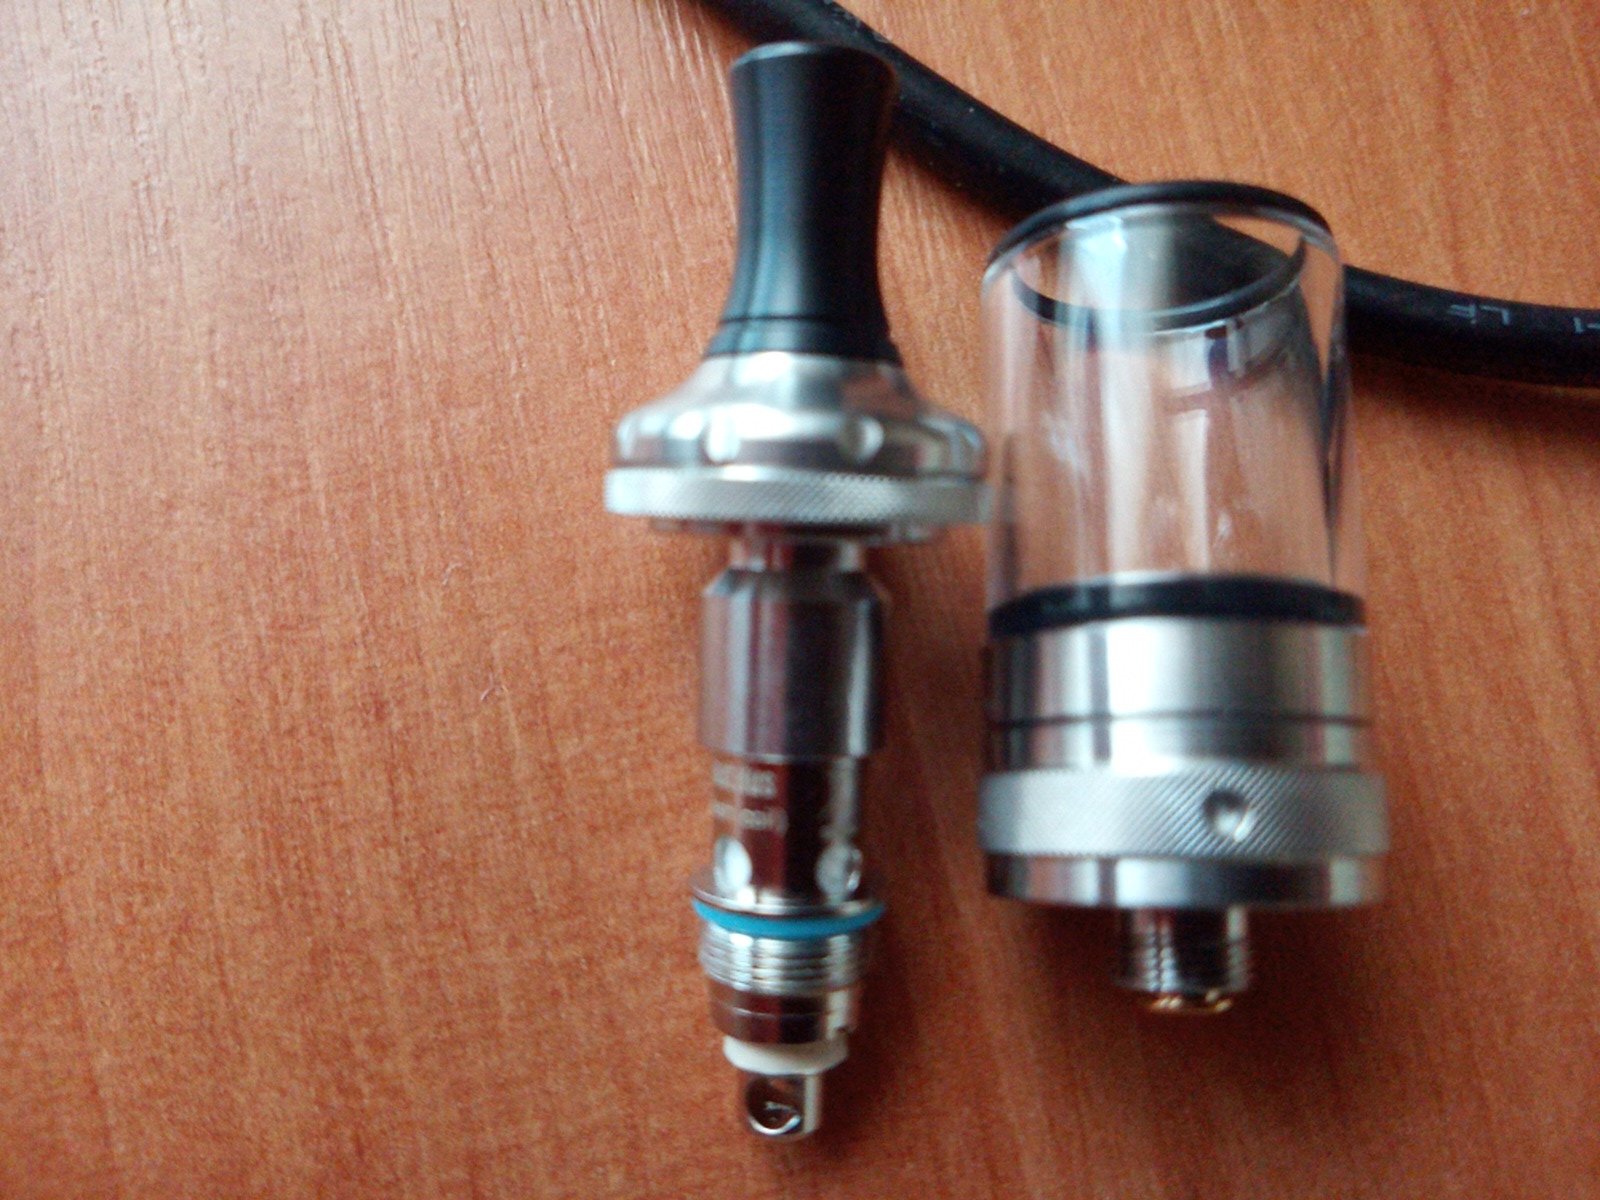 tank with a 10hm coil